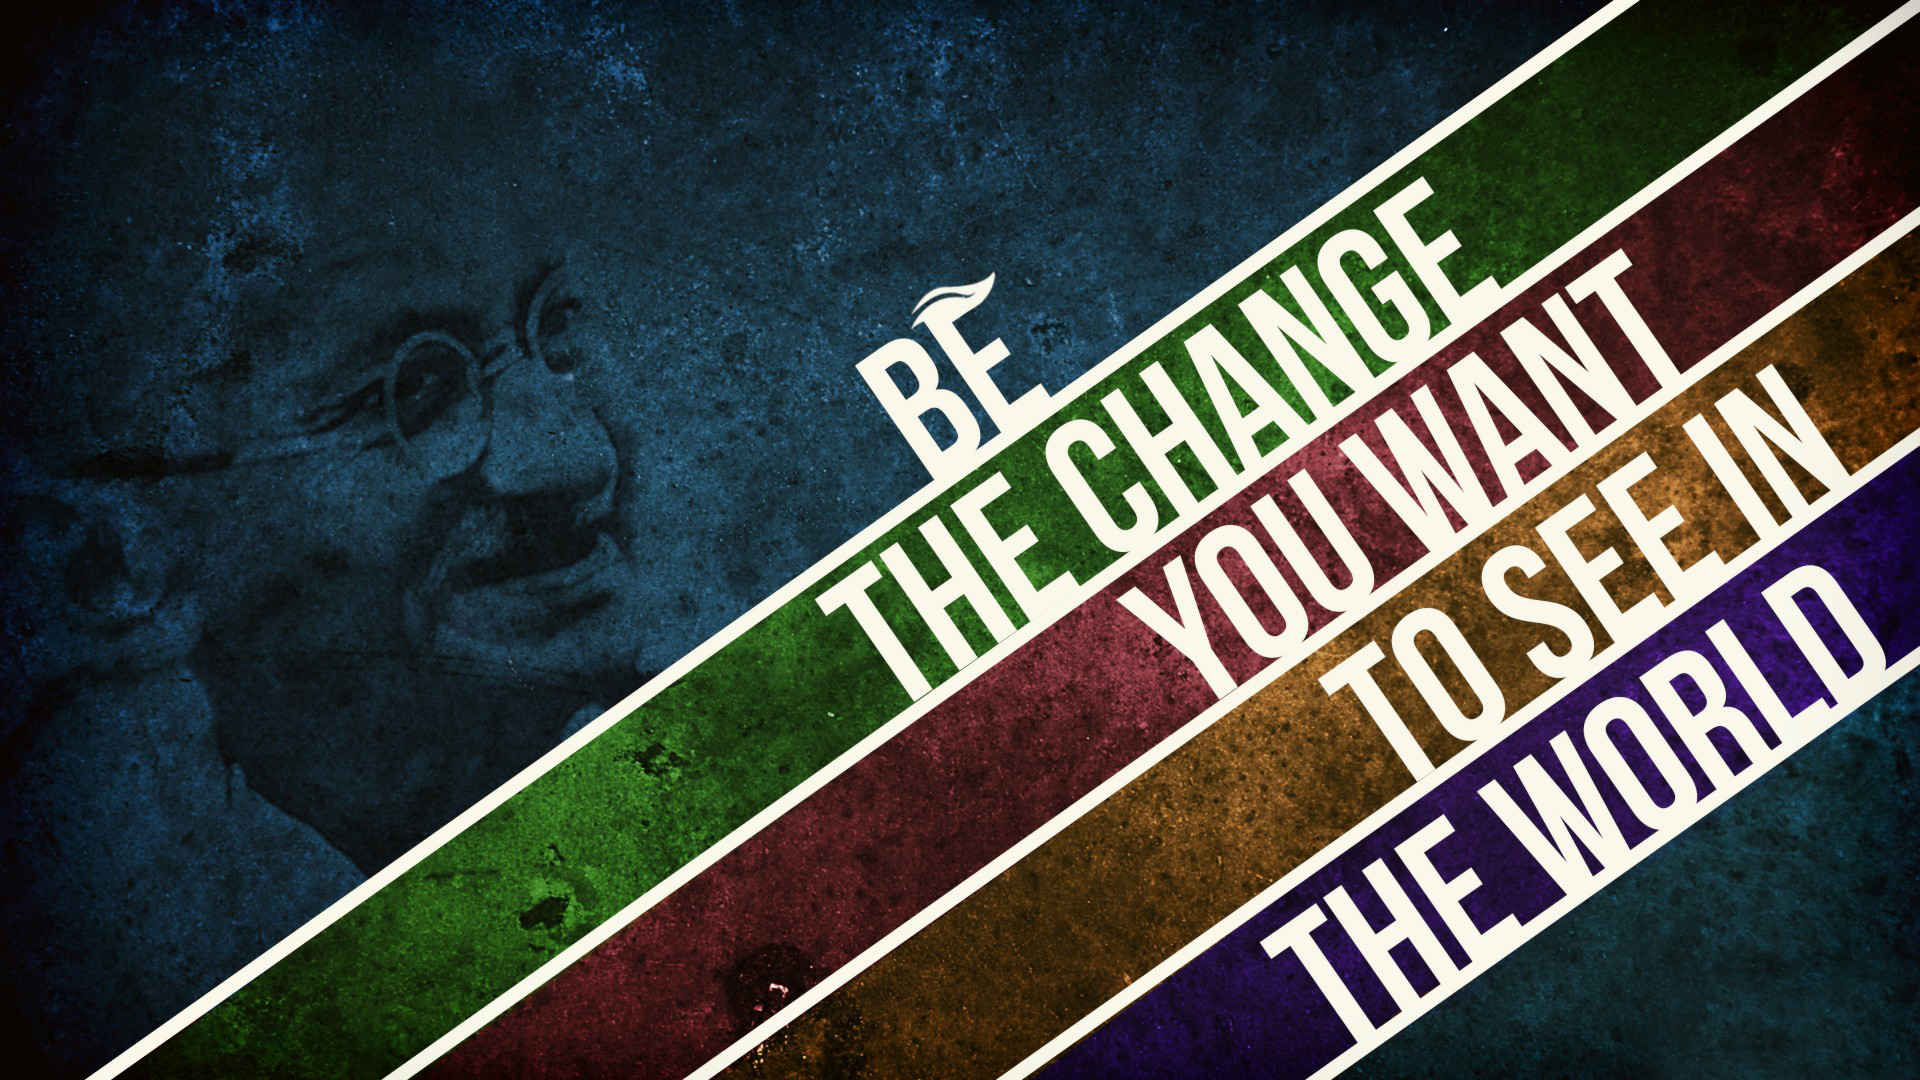 Mahatma Gandhi Jayanti Wishes HD Wallpapers, Images, Pictures & Photos